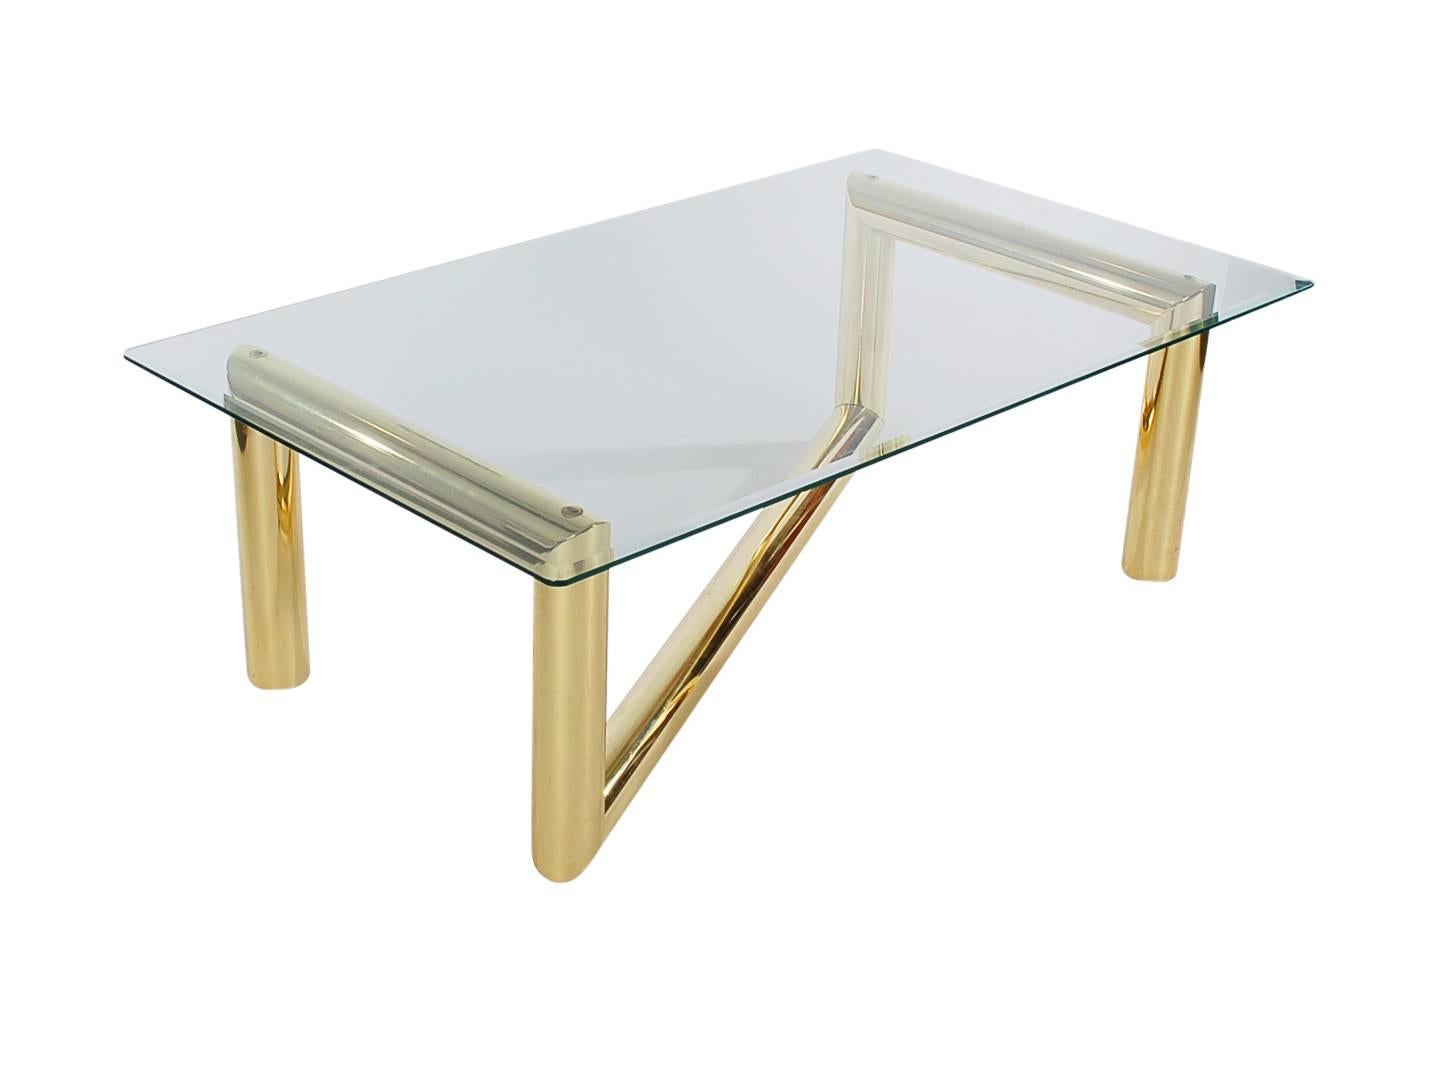 A funky and fun cocktail table. It features a thick chunky brass tubular base with clear glass top.